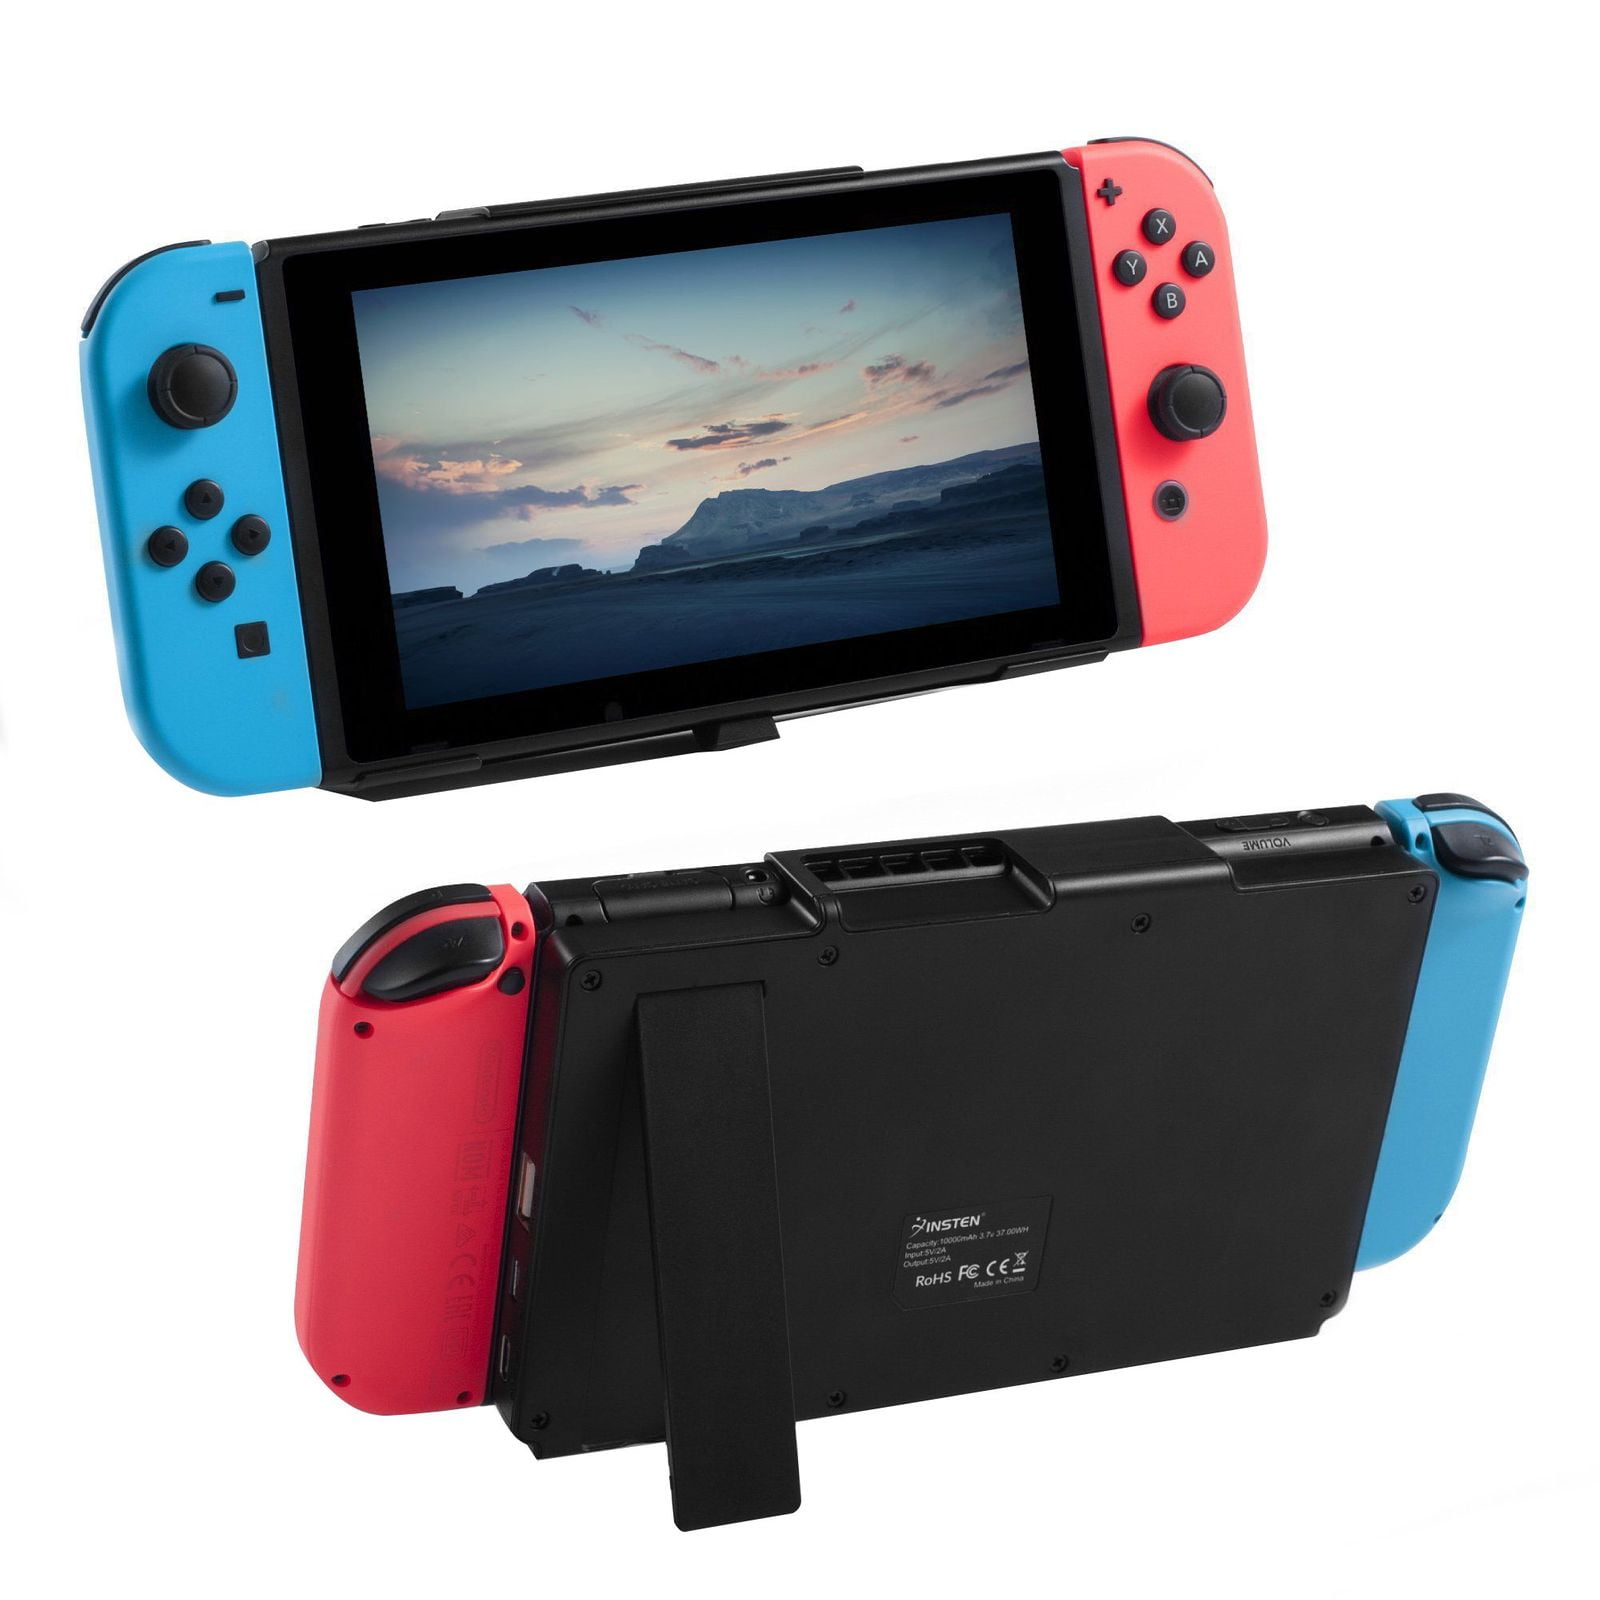 Concreet Pekkadillo Opname Battery Pack Case for Nintendo Switch Portable Charger, 10,000 mAh Power  Bank Charging Dock Stand with USB C Slot & Kickstand for Console -  Walmart.com